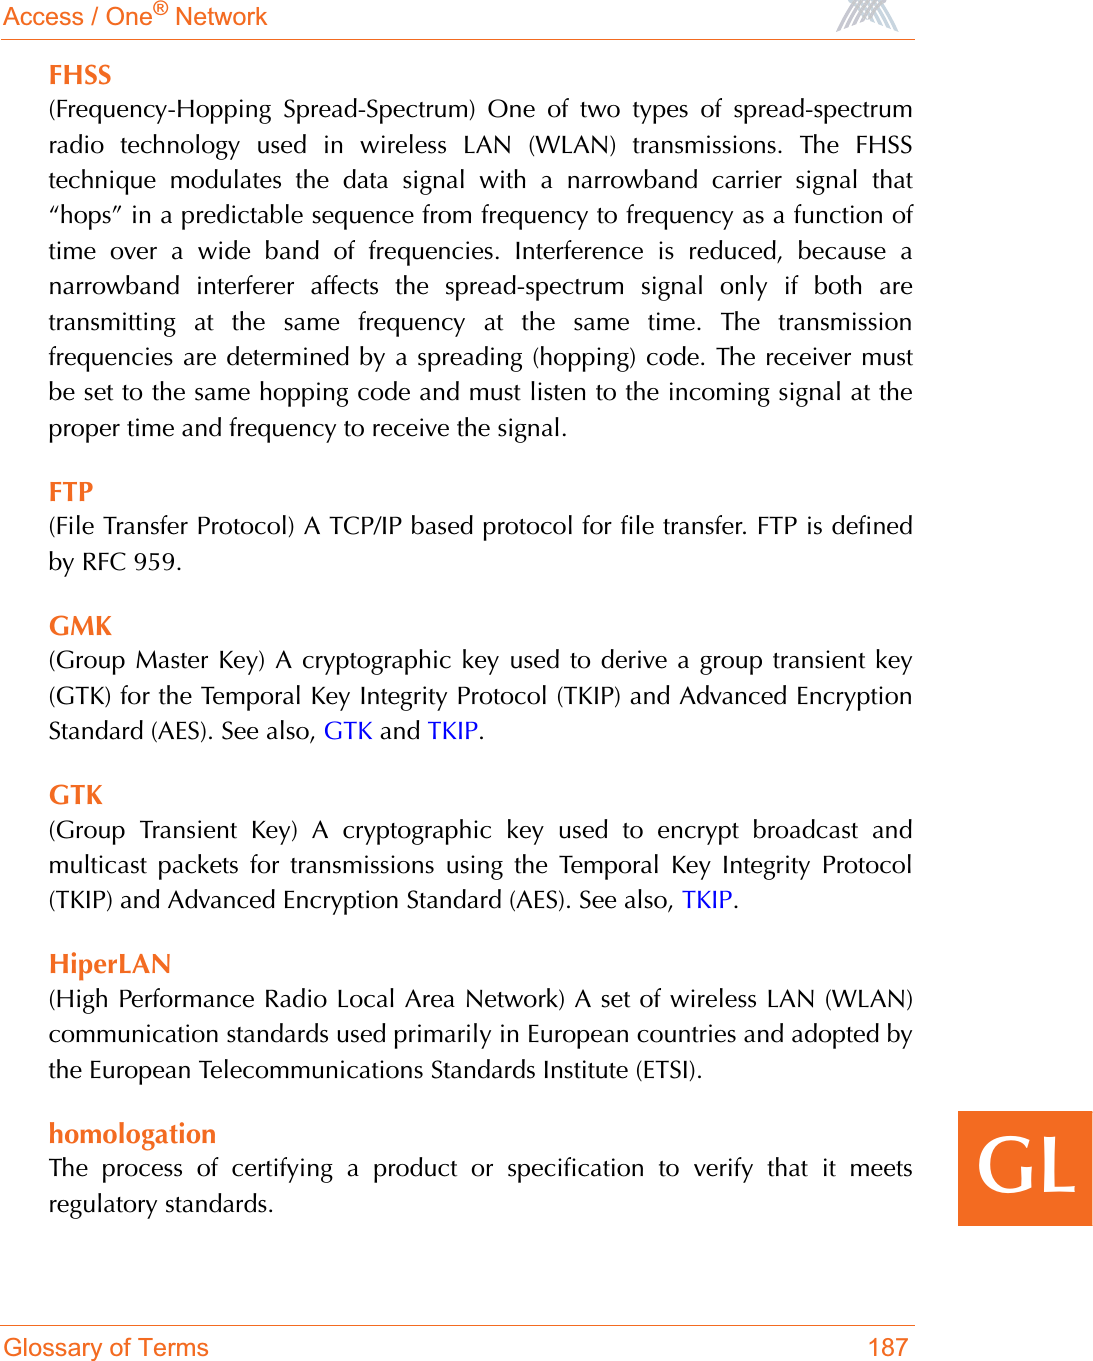 Access / One® NetworkGlossary of Terms 187GLFHSS(Frequency-Hopping Spread-Spectrum) One of two types of spread-spectrumradio technology used in wireless LAN (WLAN) transmissions. The FHSStechnique modulates the data signal with a narrowband carrier signal that“hops” in a predictable sequence from frequency to frequency as a function oftime over a wide band of frequencies. Interference is reduced, because anarrowband interferer affects the spread-spectrum signal only if both aretransmitting at the same frequency at the same time. The transmissionfrequencies are determined by a spreading (hopping) code. The receiver mustbe set to the same hopping code and must listen to the incoming signal at theproper time and frequency to receive the signal.FTP(File Transfer Protocol) A TCP/IP based protocol for file transfer. FTP is definedby RFC 959.GMK(Group Master Key) A cryptographic key used to derive a group transient key(GTK) for the Temporal Key Integrity Protocol (TKIP) and Advanced EncryptionStandard (AES). See also, GTK and TKIP.GTK(Group Transient Key) A cryptographic key used to encrypt broadcast andmulticast packets for transmissions using the Temporal Key Integrity Protocol(TKIP) and Advanced Encryption Standard (AES). See also, TKIP.HiperLAN(High Performance Radio Local Area Network) A set of wireless LAN (WLAN)communication standards used primarily in European countries and adopted bythe European Telecommunications Standards Institute (ETSI). homologationThe process of certifying a product or specification to verify that it meetsregulatory standards.